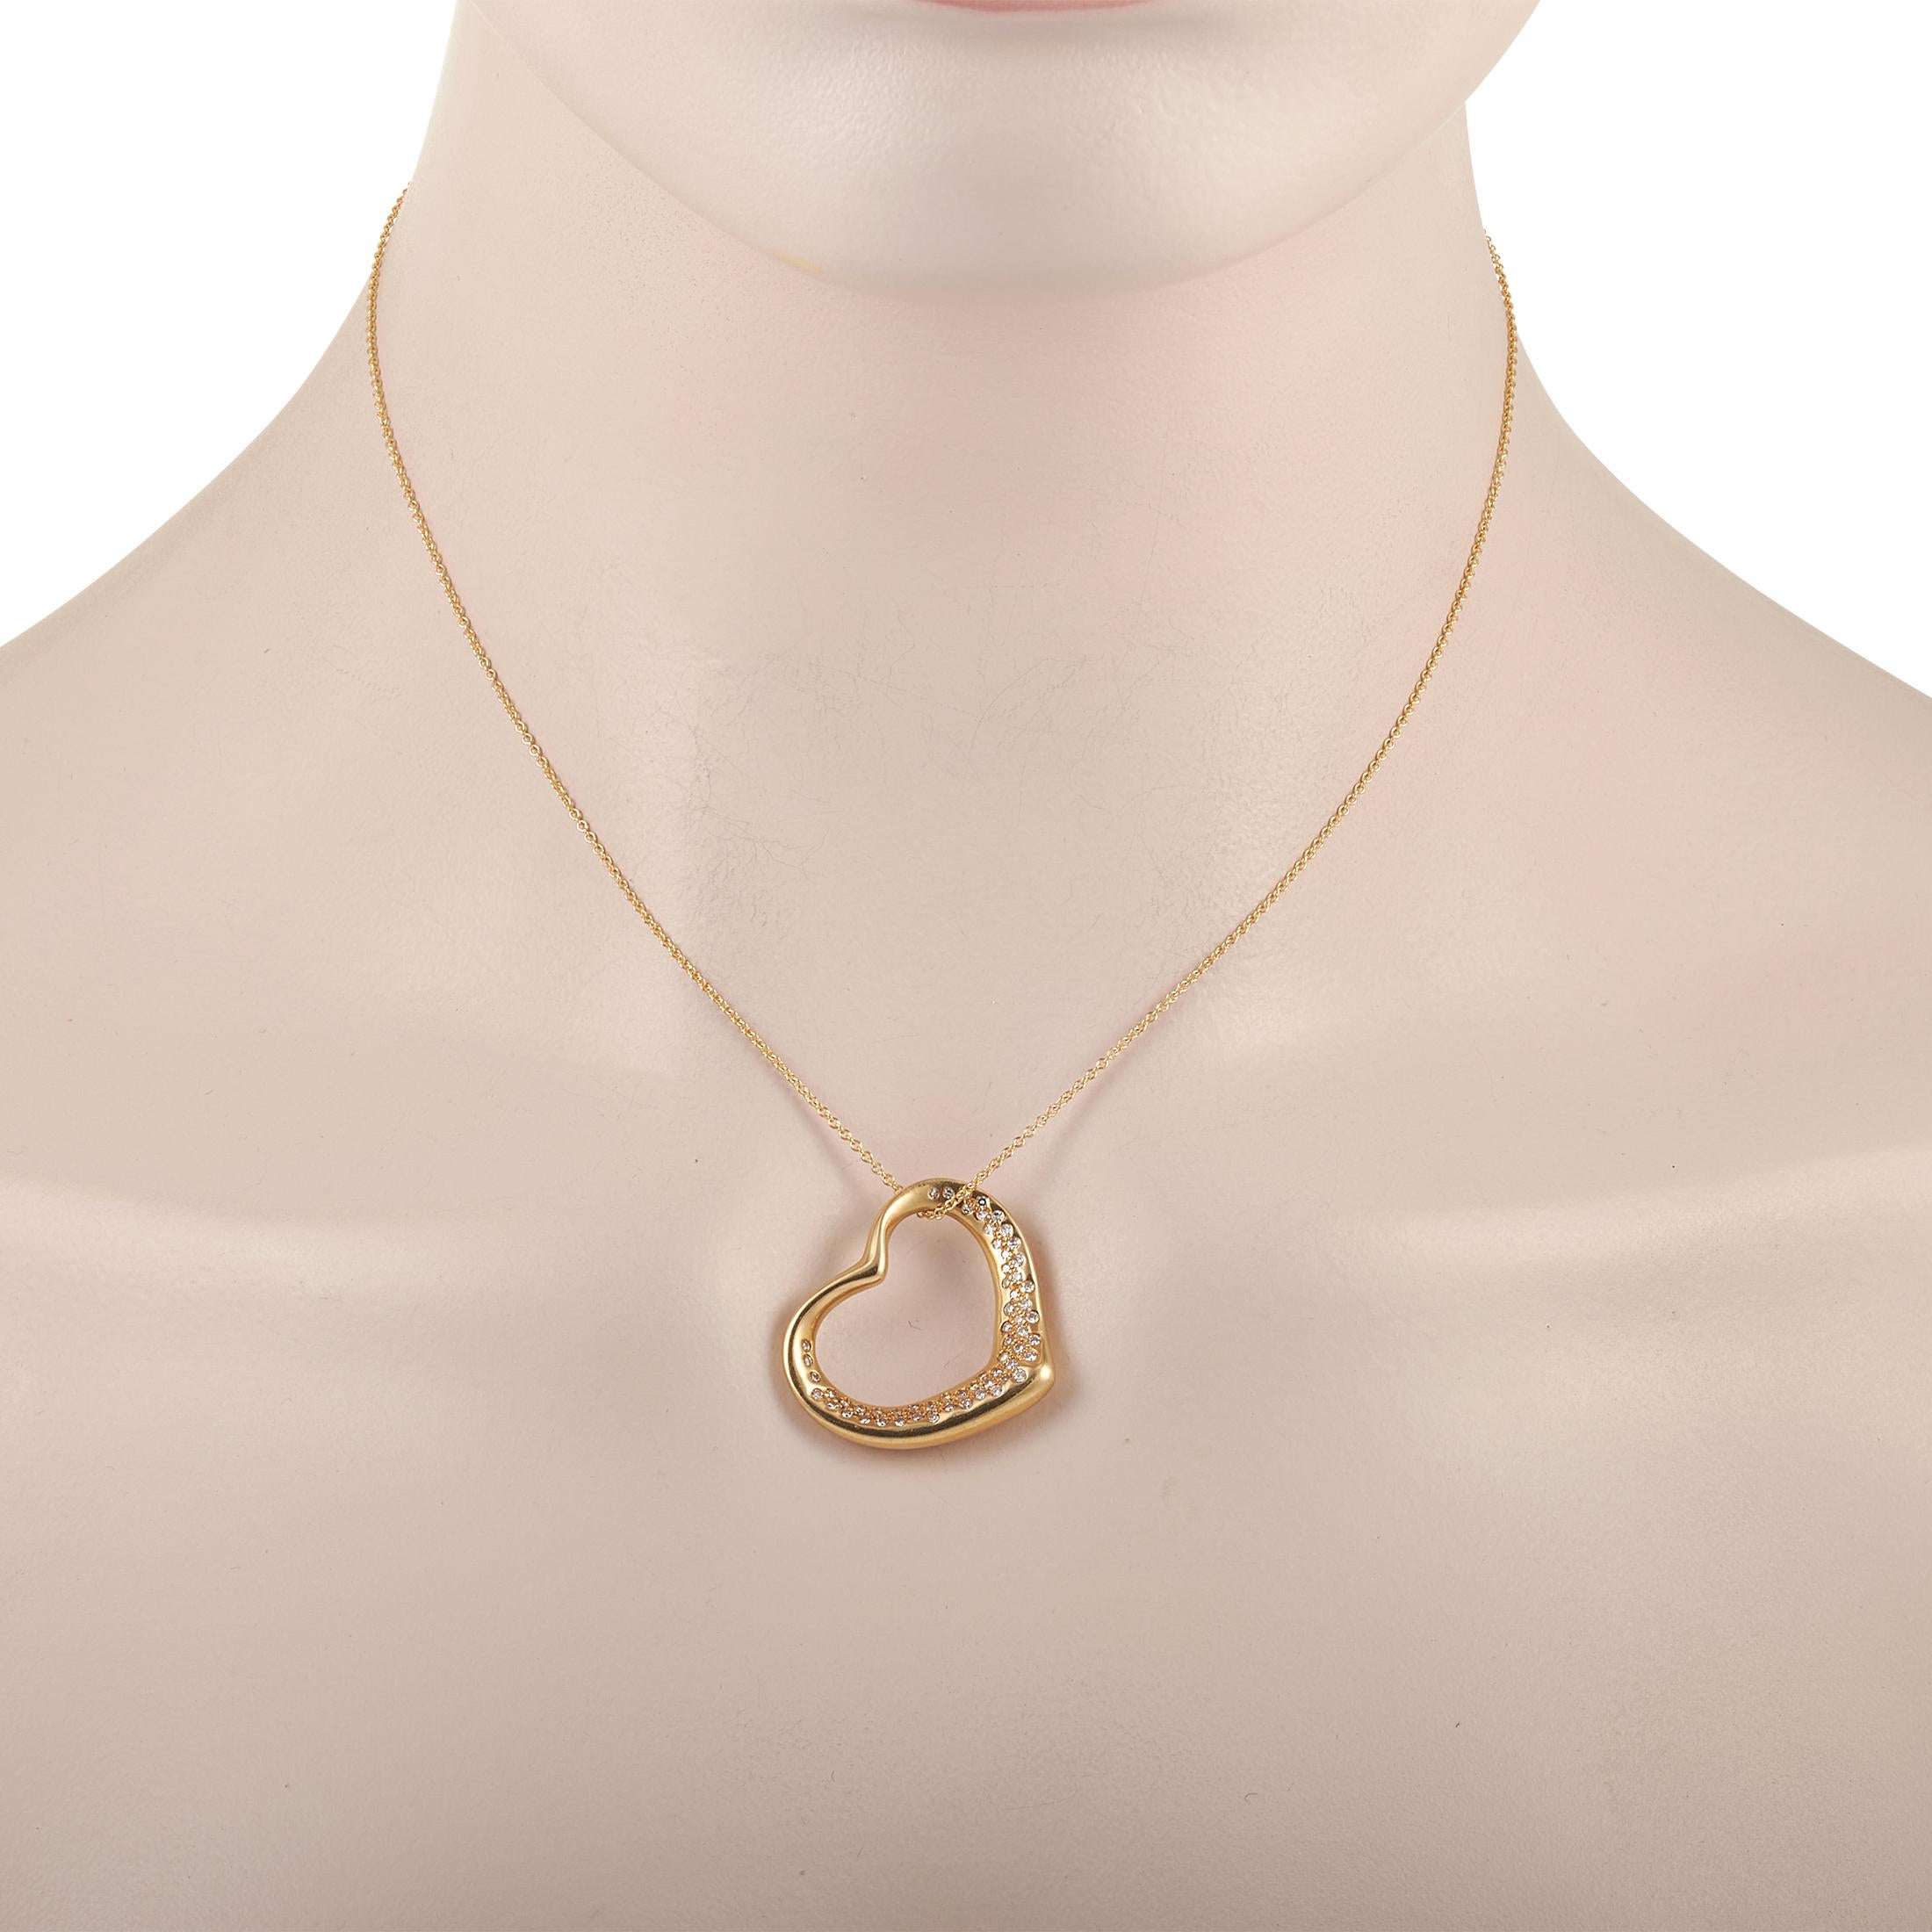 Celebrate love with this Tiffany & Co. Elsa Peretti 18K Yellow Gold 0.75 ct Diamond Heart Pendant Necklace. Whether given as an anniversary present or as a fancy little treat for yourself, this piece of jewelry is guaranteed to bring delight. The